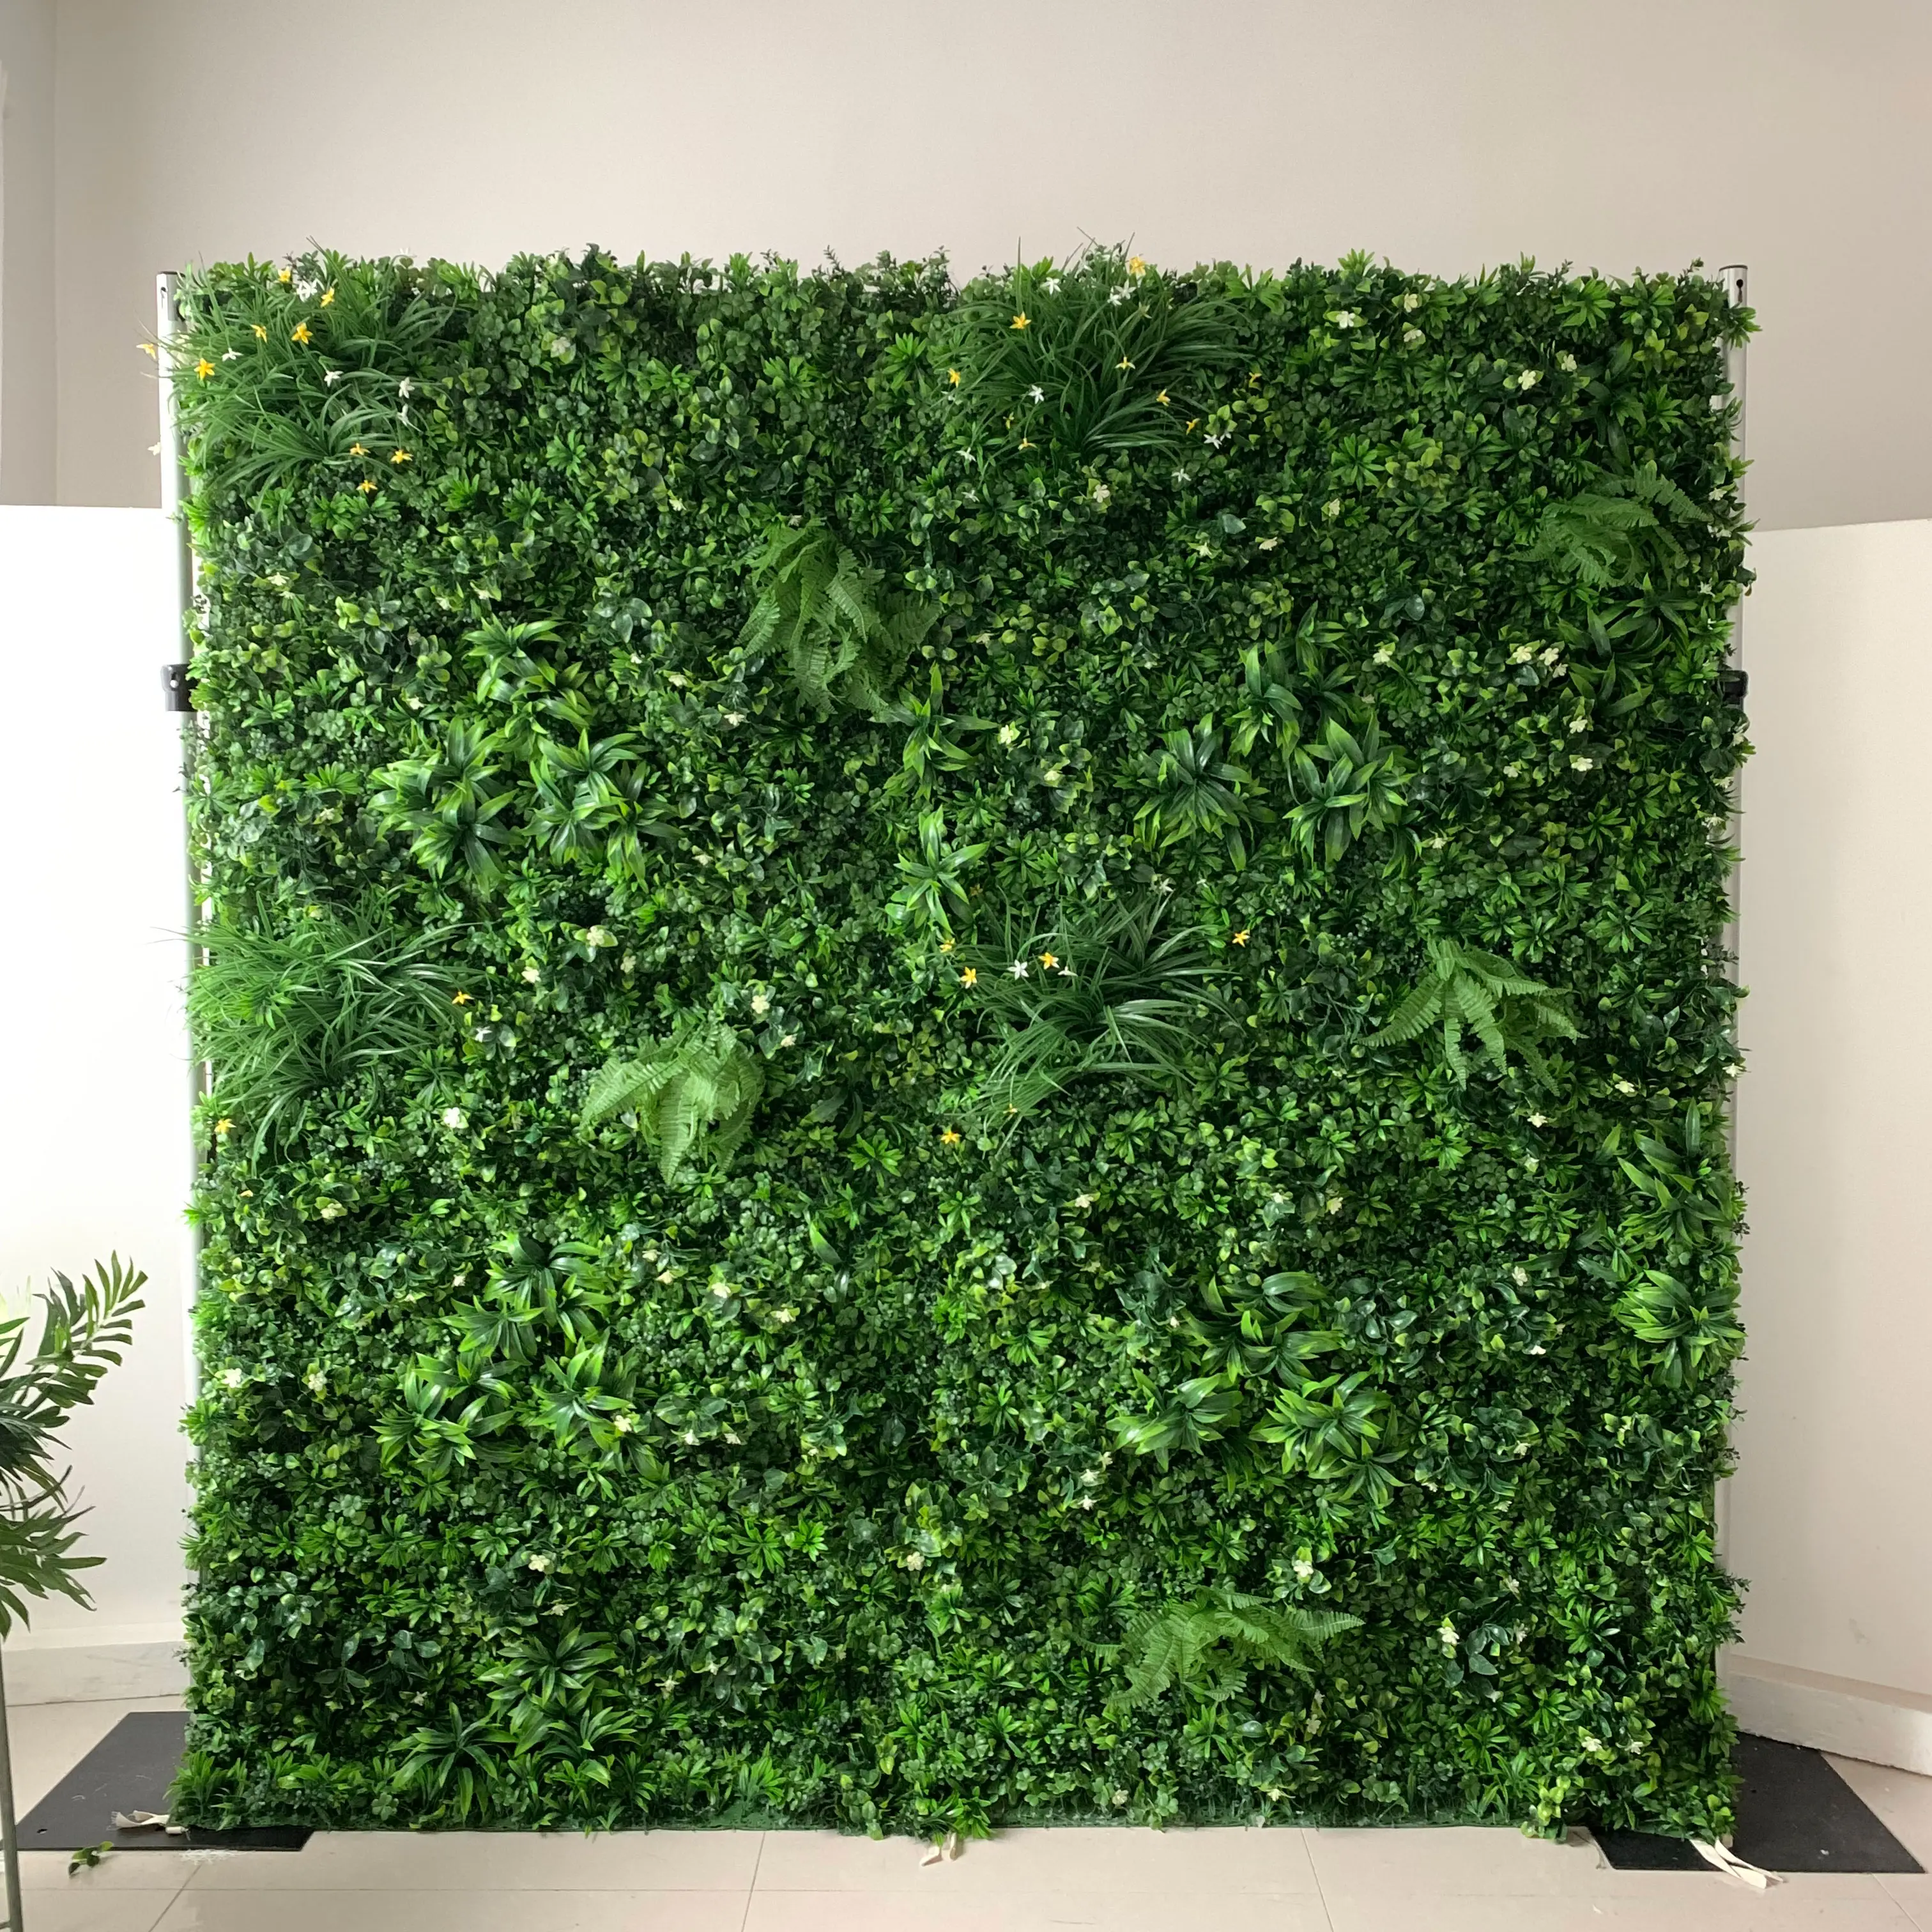 8ftx8ft Roll Up Grass Wall Decor Hot Sale Artificial Plant Wall High Quality Green Grass Backdrop Wall for Events Wedding Decor